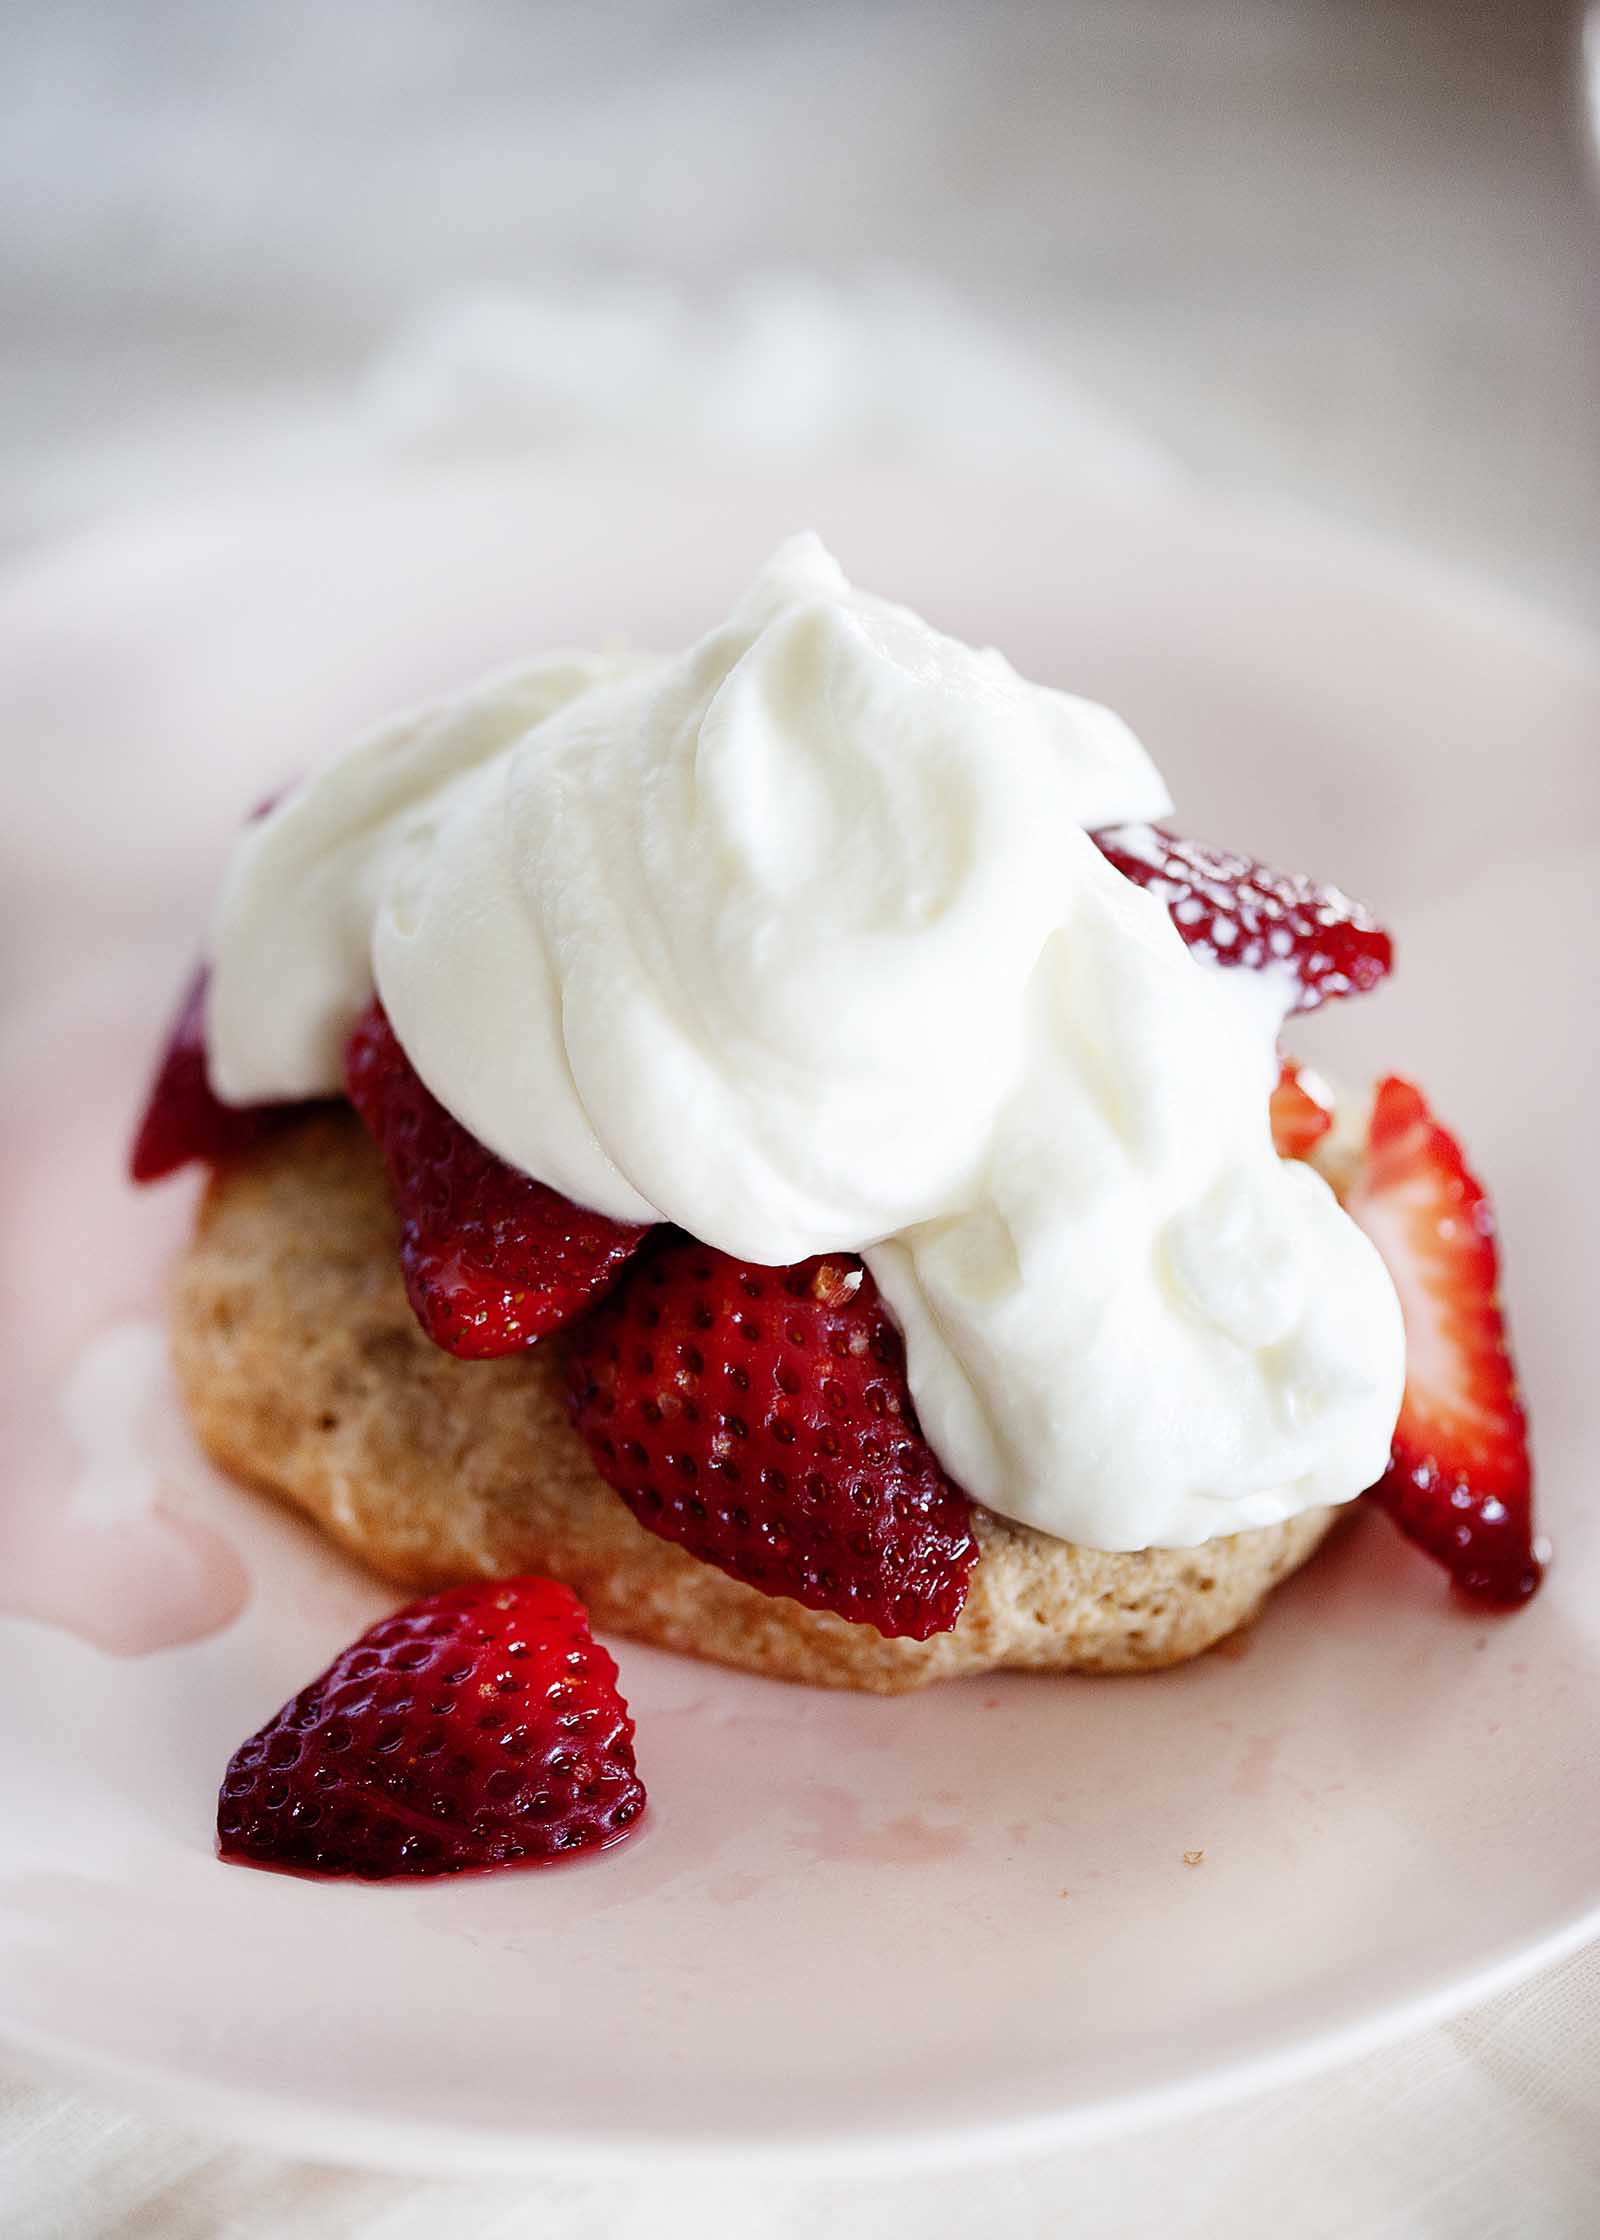 Close up of open-faced strawberry shortcake with sliced strawberries and whipped yogurt topping.